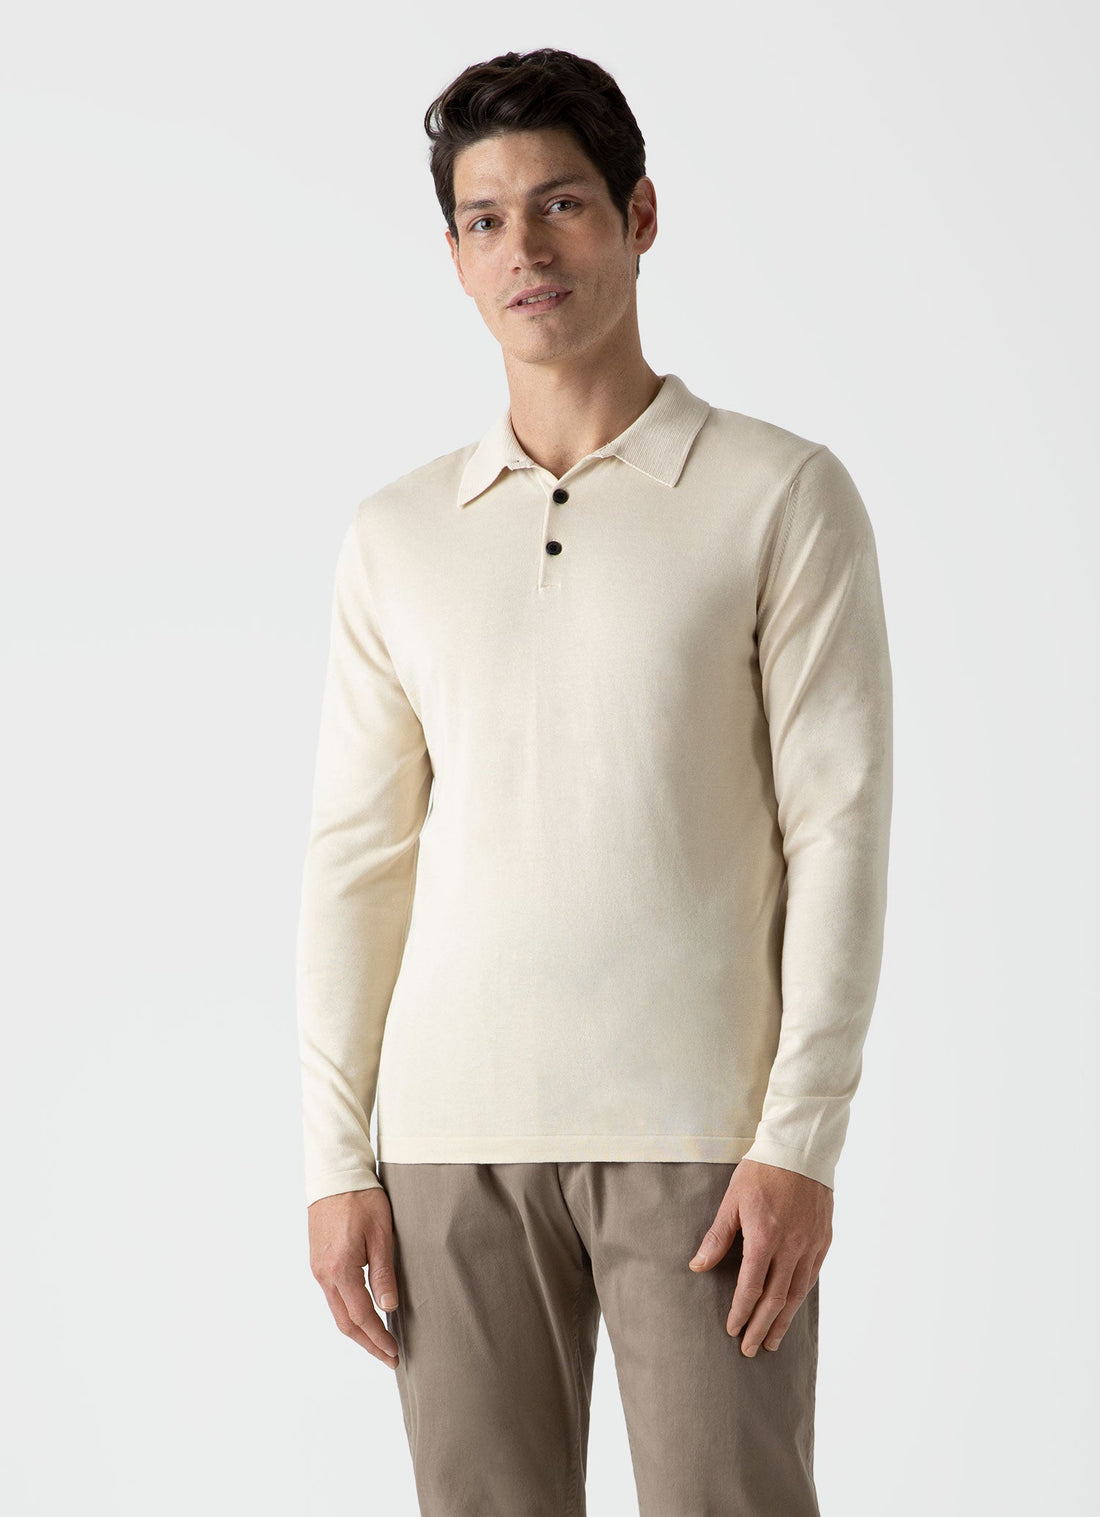 Short sleeve piqué polo shirt in a regular fit Made of pure organic cotton